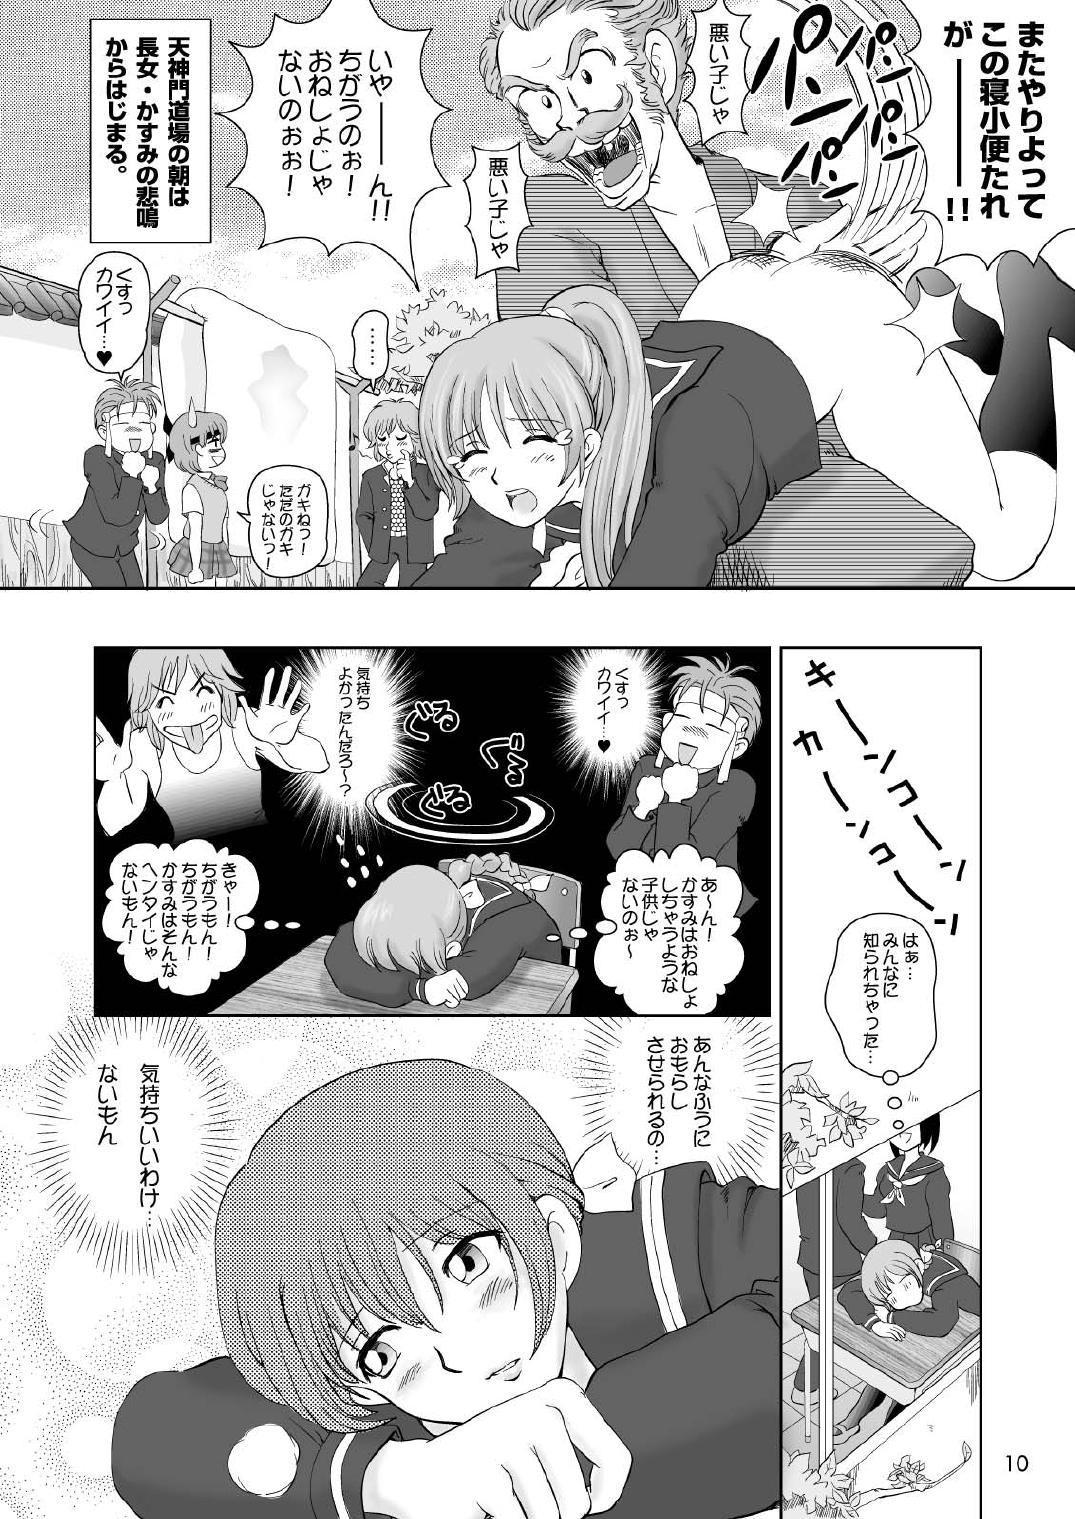 Metendo Sugoiyo!! Kasumi-chan 2 - Dead or alive Amatures Gone Wild - Page 10